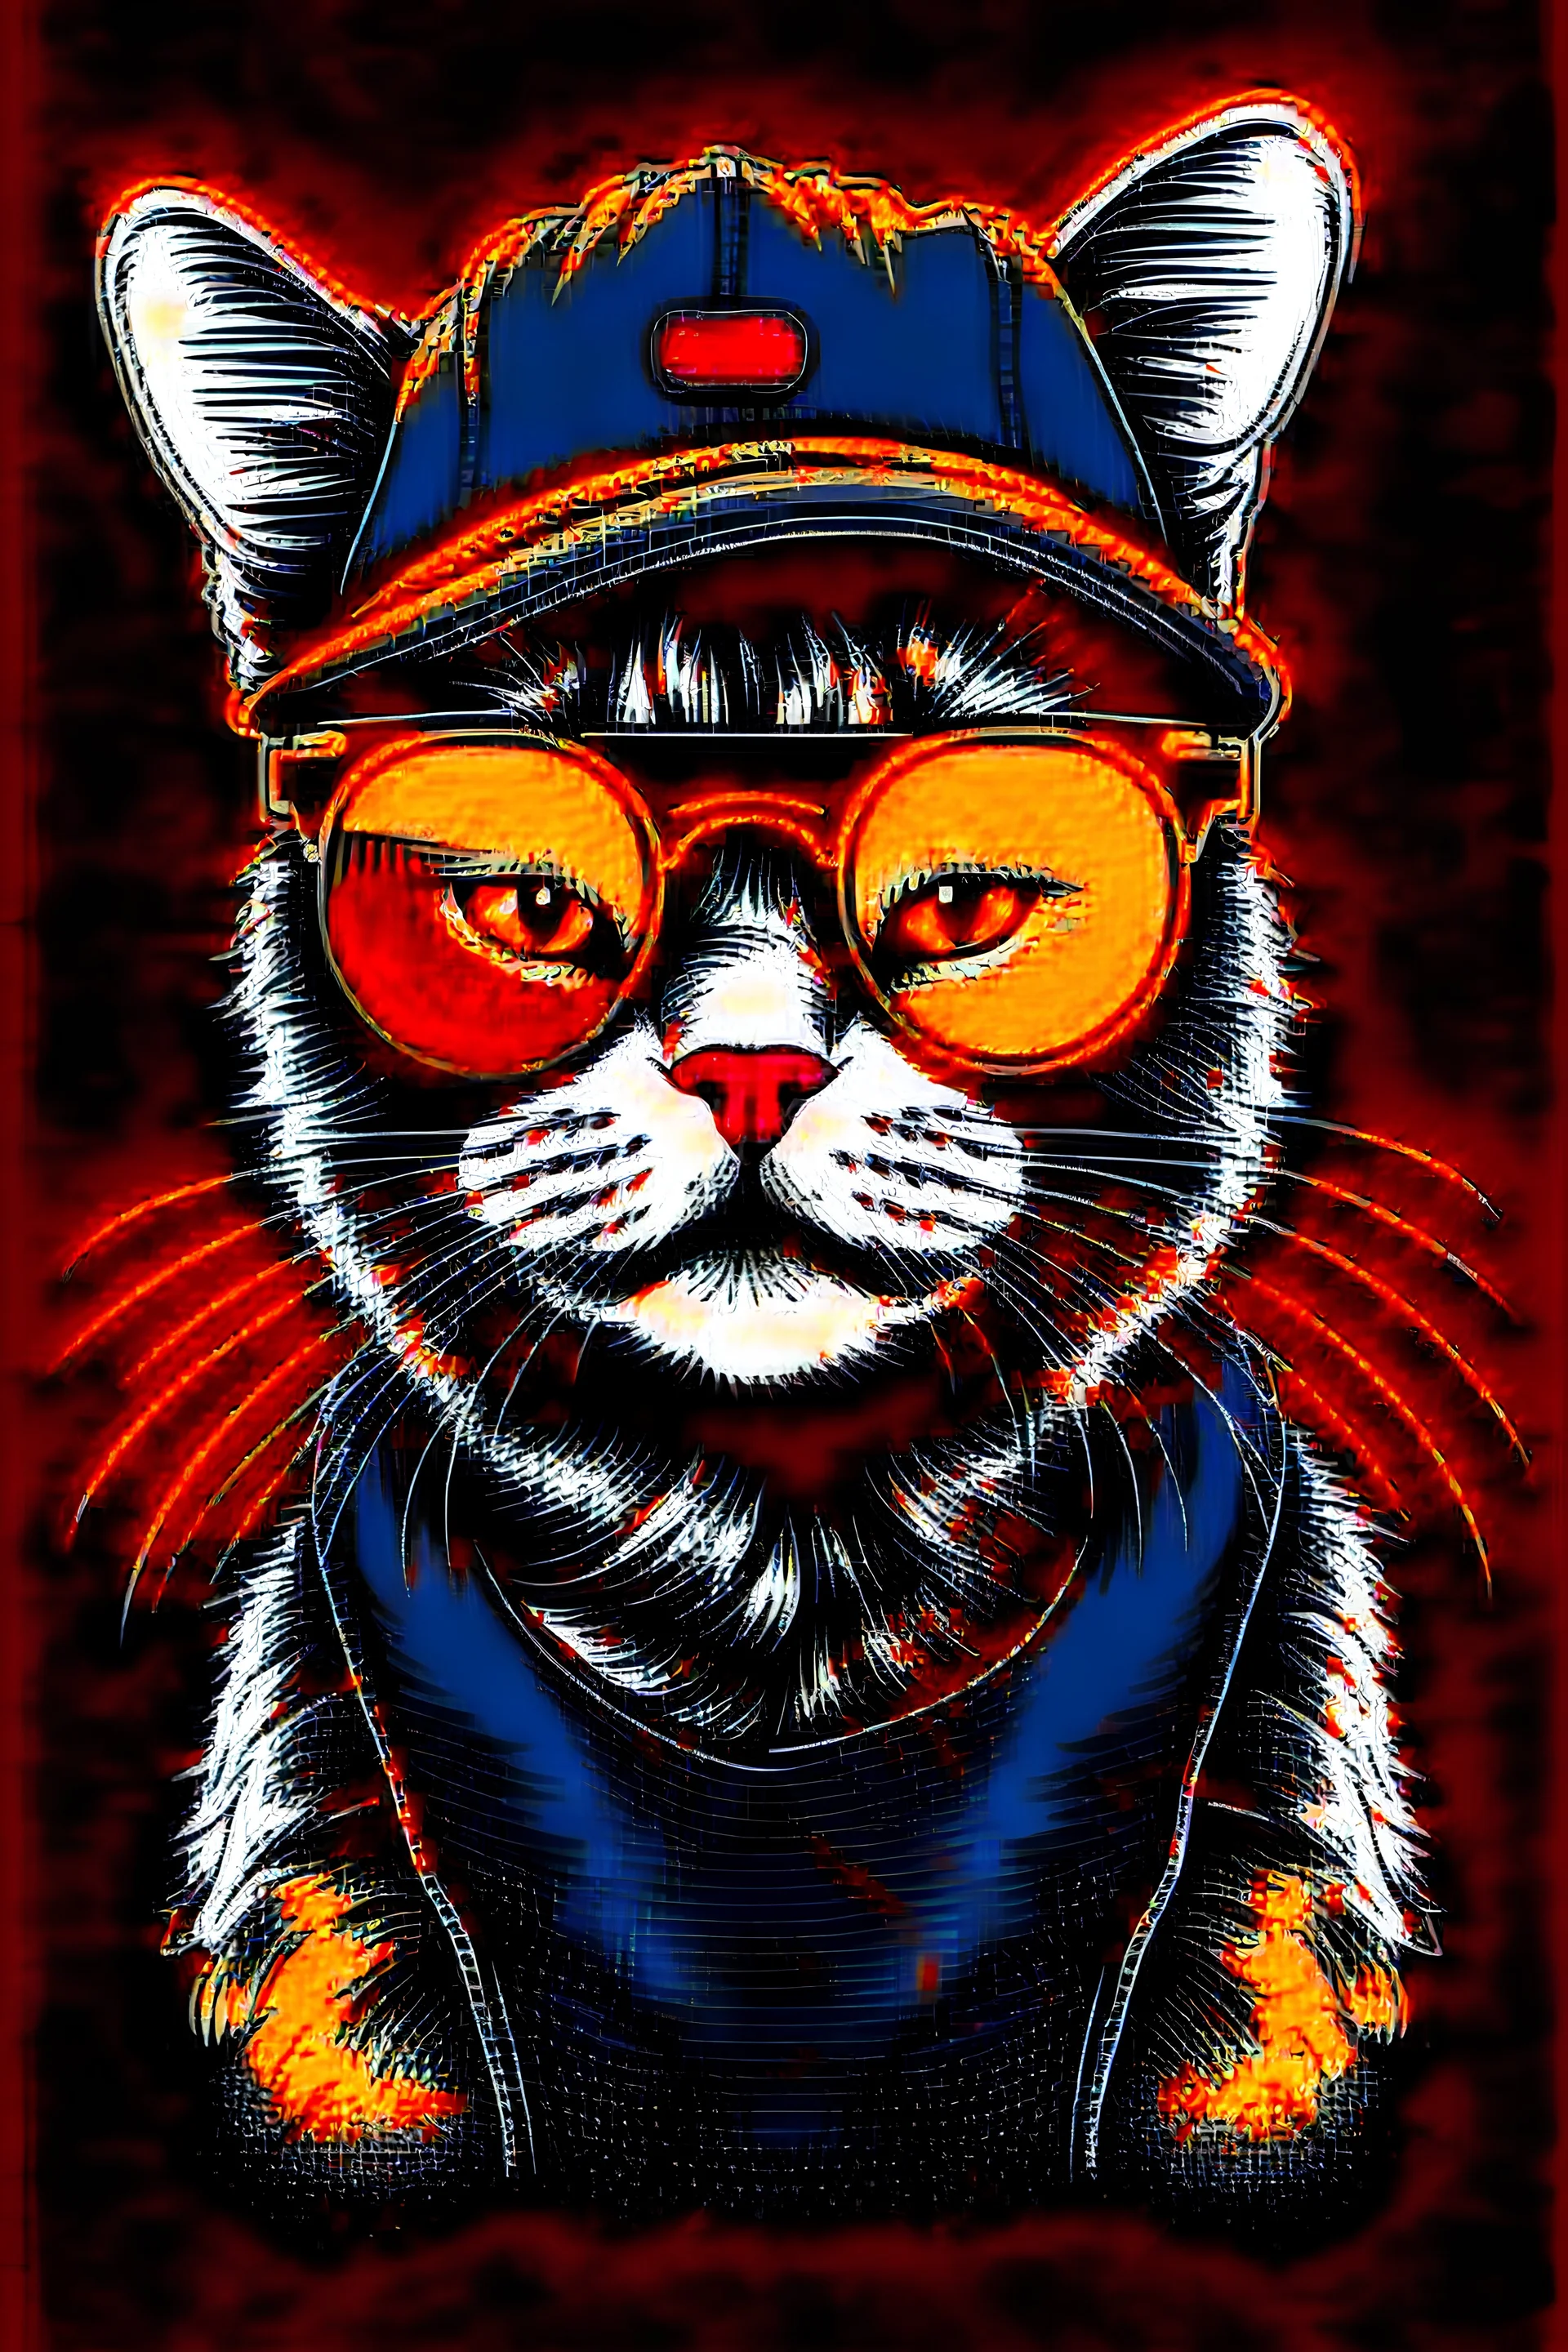 Cool cat with glasses and black cap, vivd colors, hold the arms